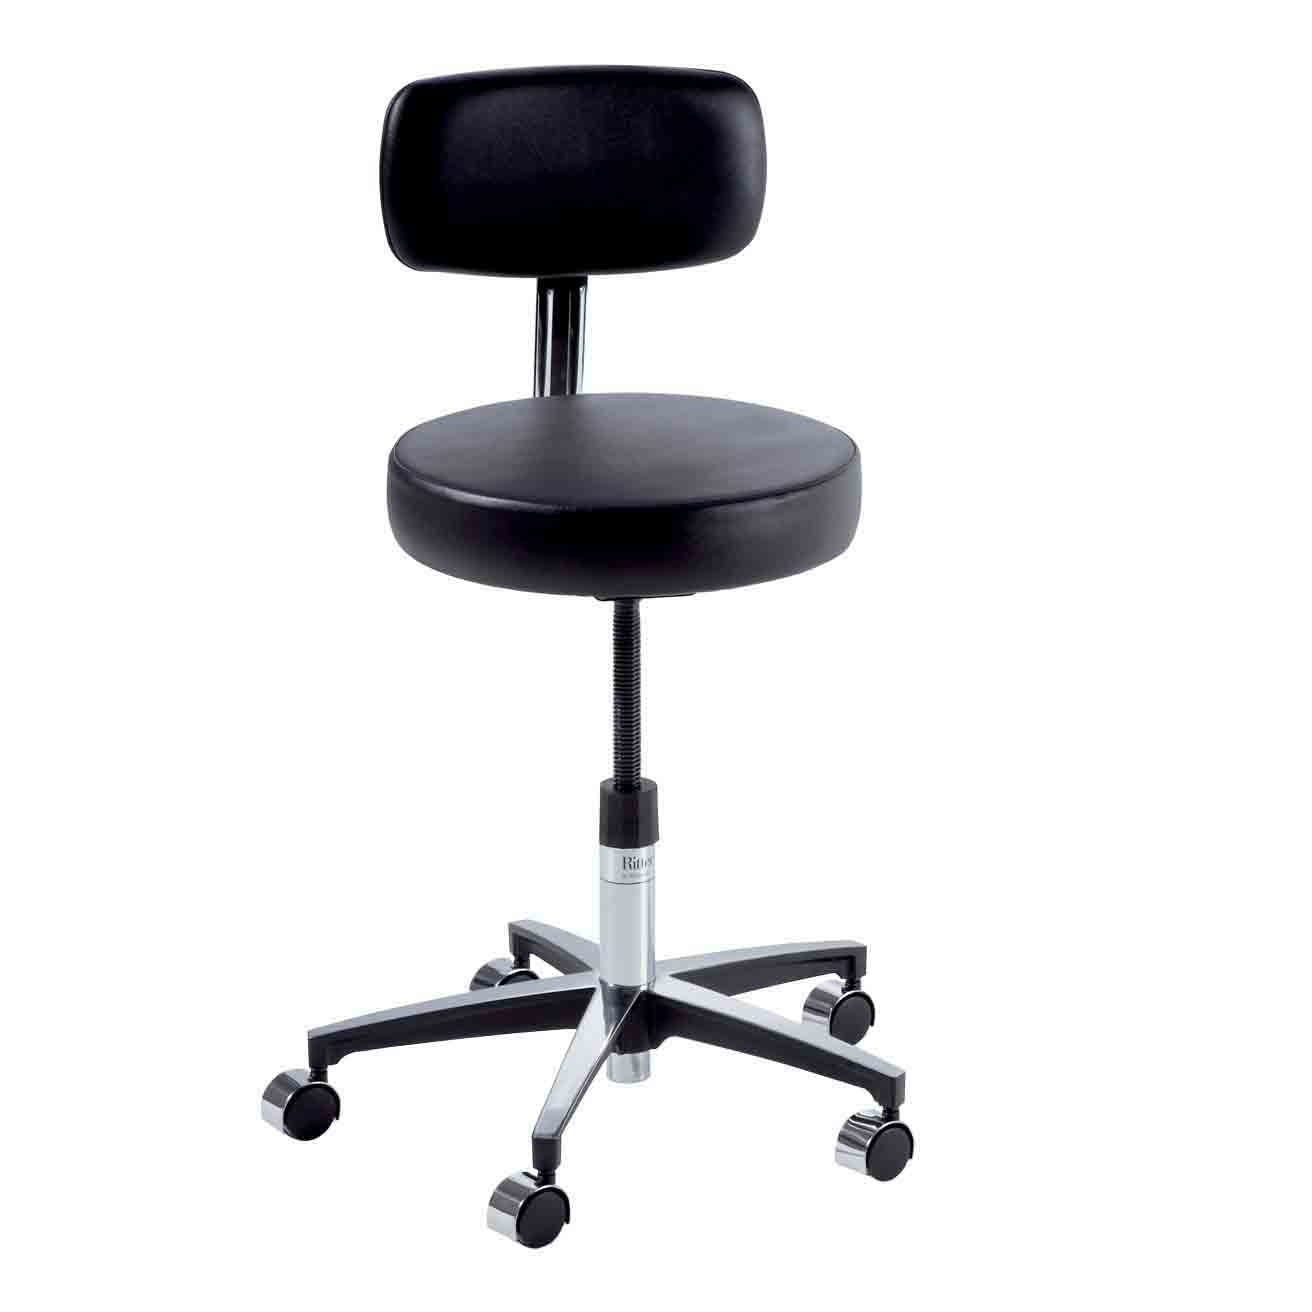 Ritter 275 Adjustable Physician Stool with Soft Rubber Casters